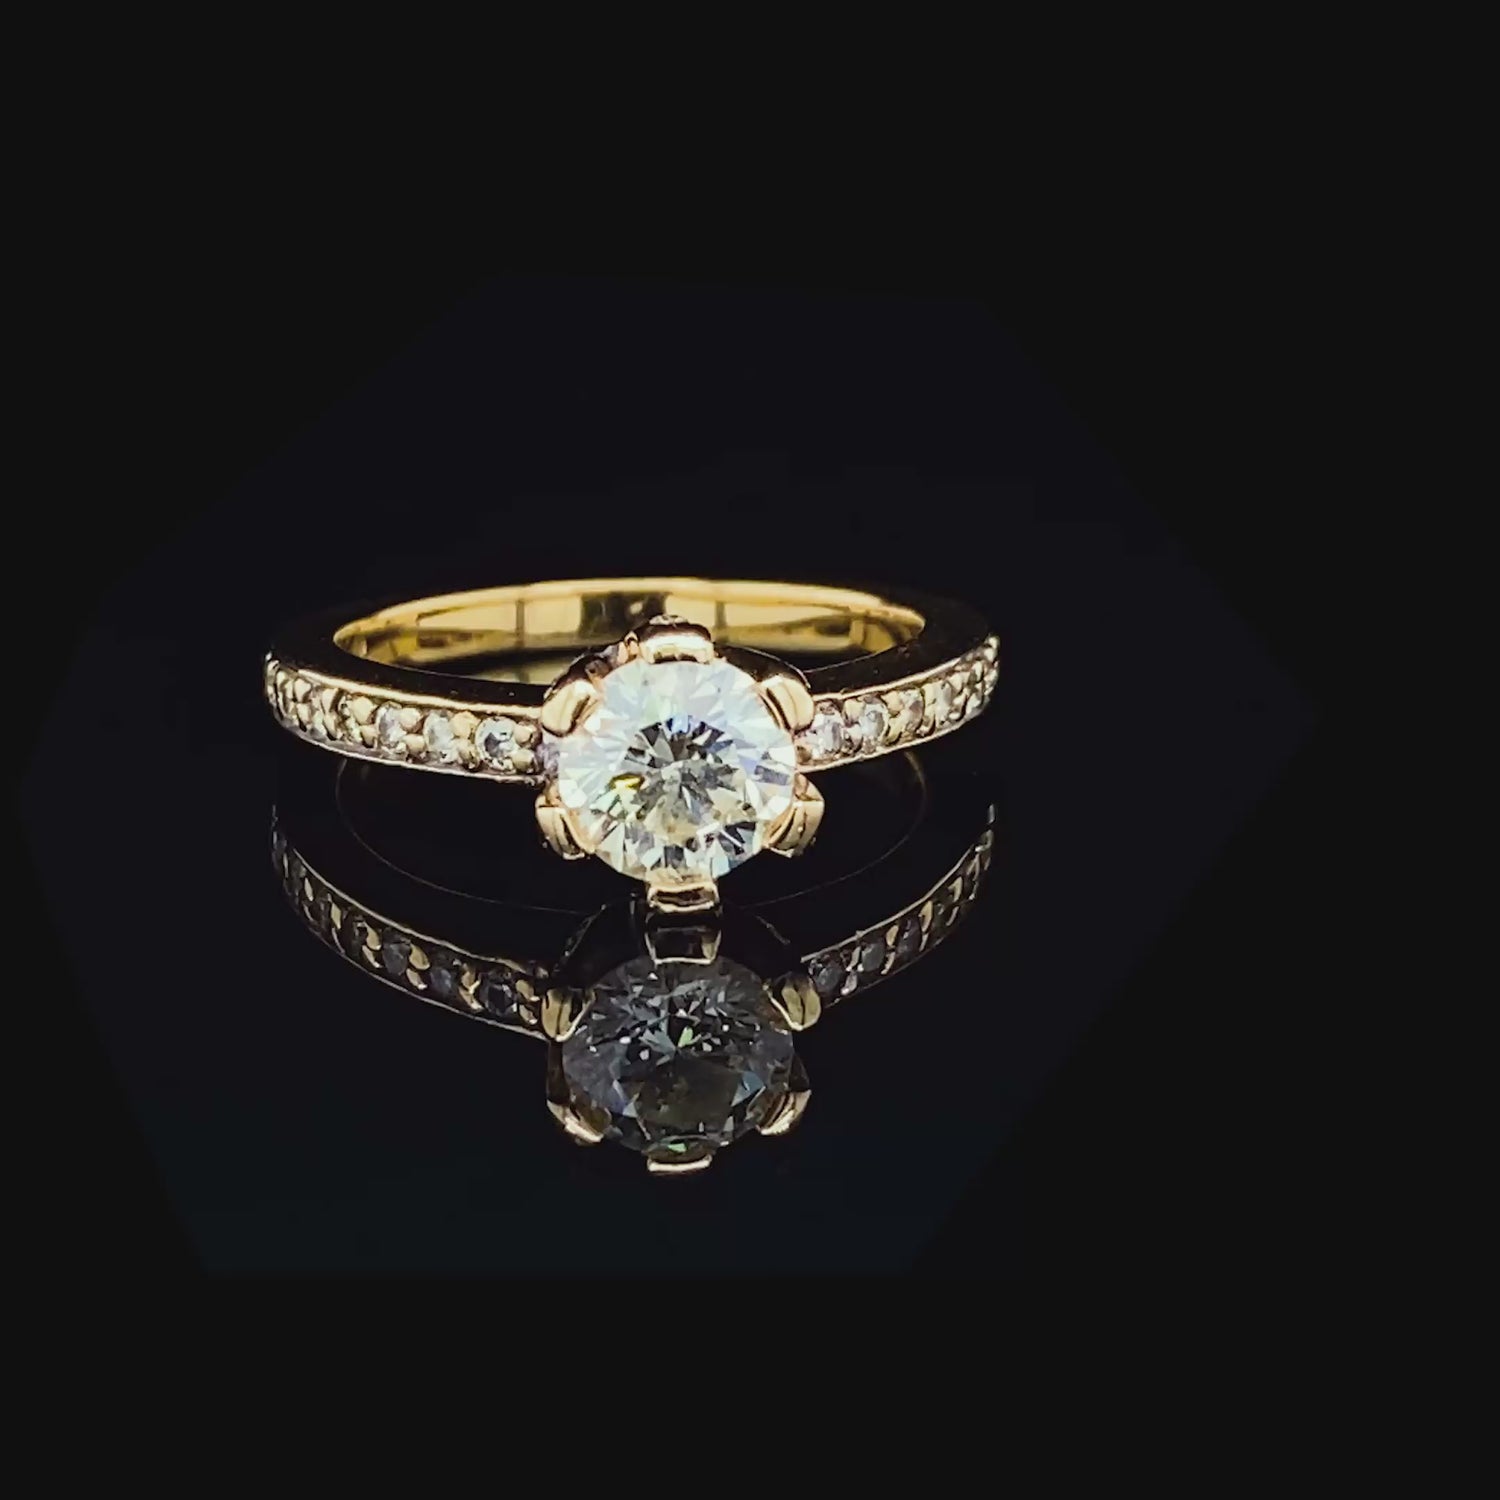 Limited 1.35 CT Round Cut Diamond Engagement Ring in 14KT Yellow Gold